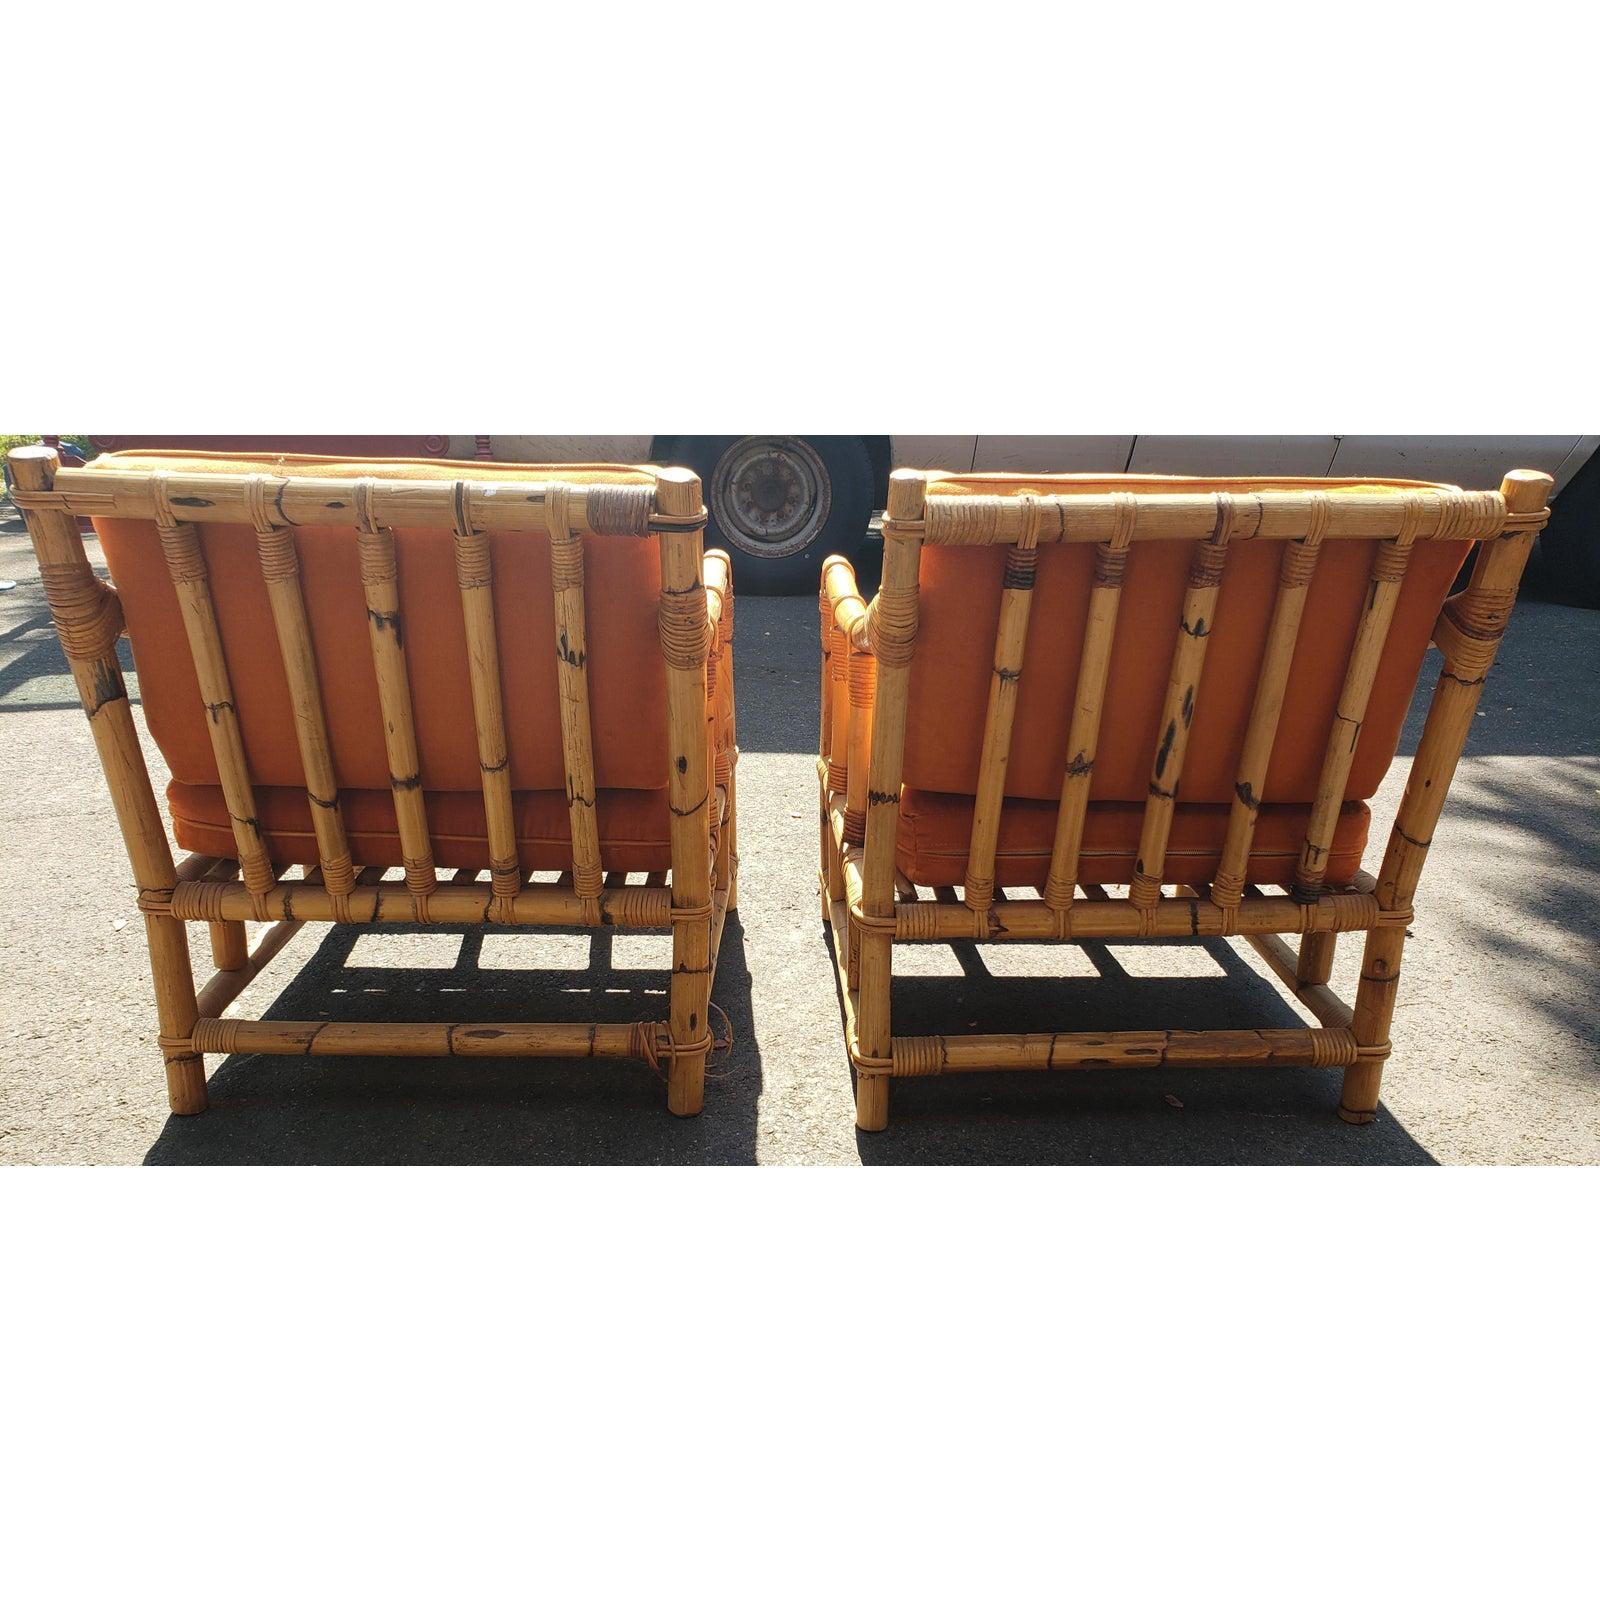 Upholstery 1950s Vintage Bamboo Lounge Chairs, a Pair